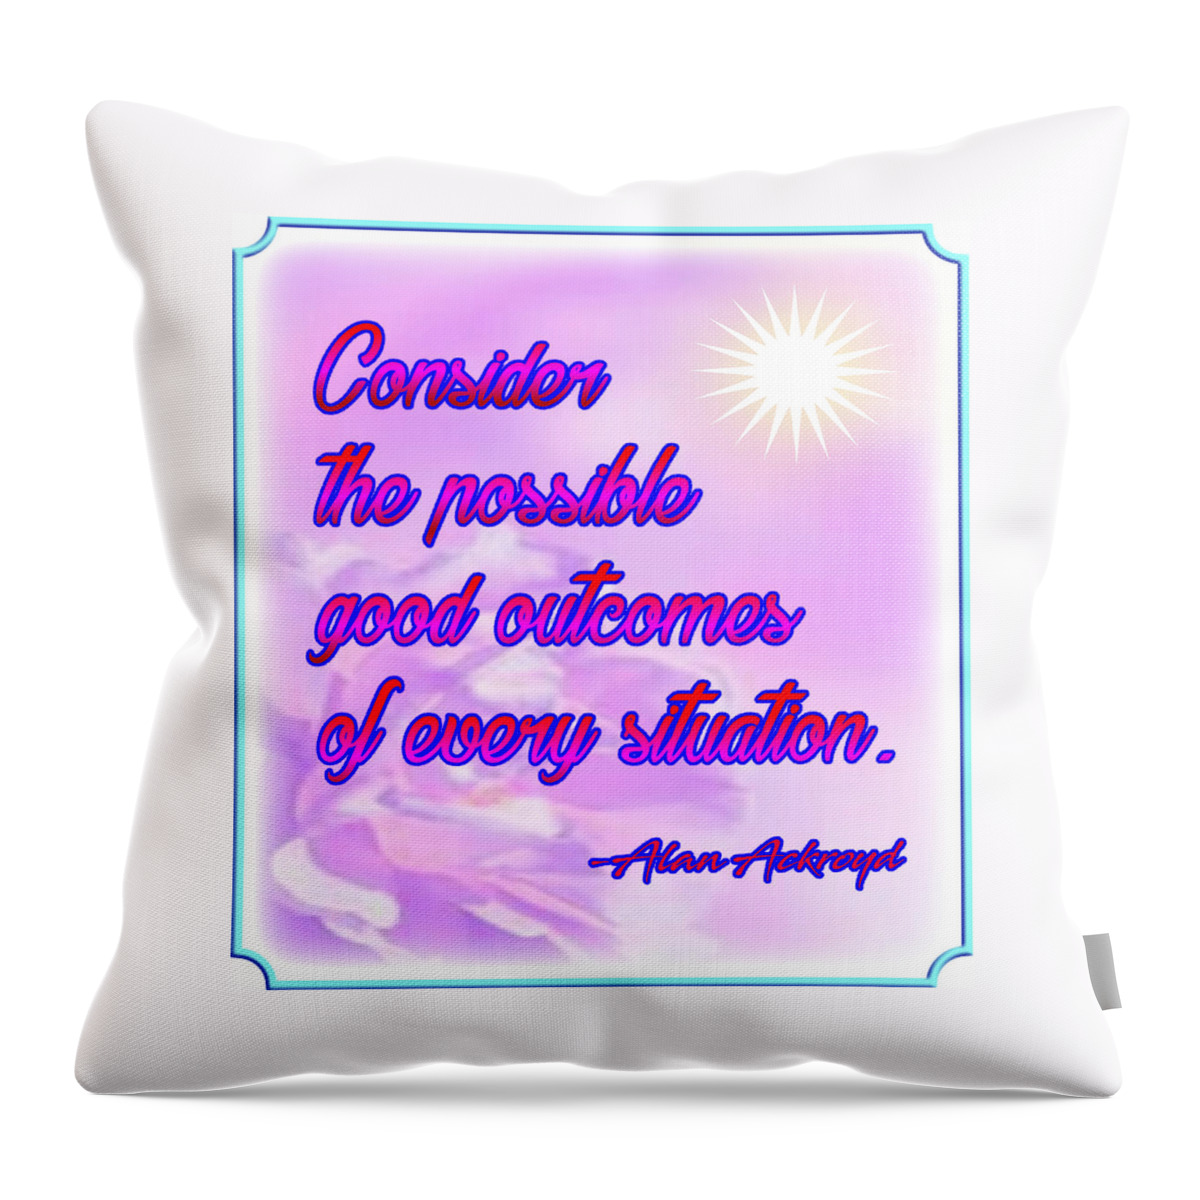 Quotation Throw Pillow featuring the digital art Consider Good Outcomes by Alan Ackroyd